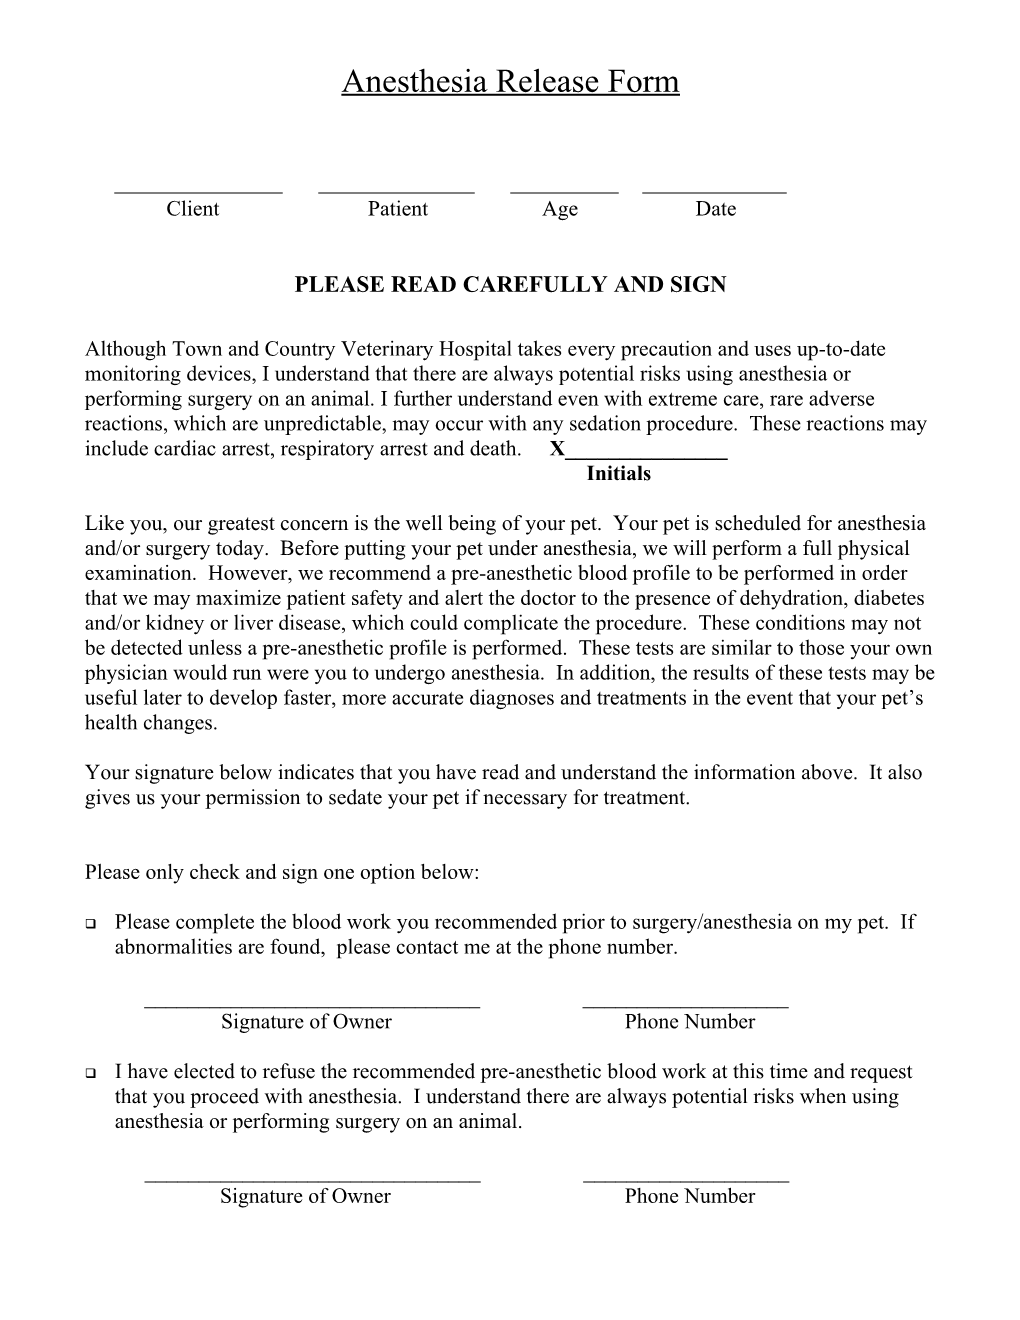 Anesthesia Release Form